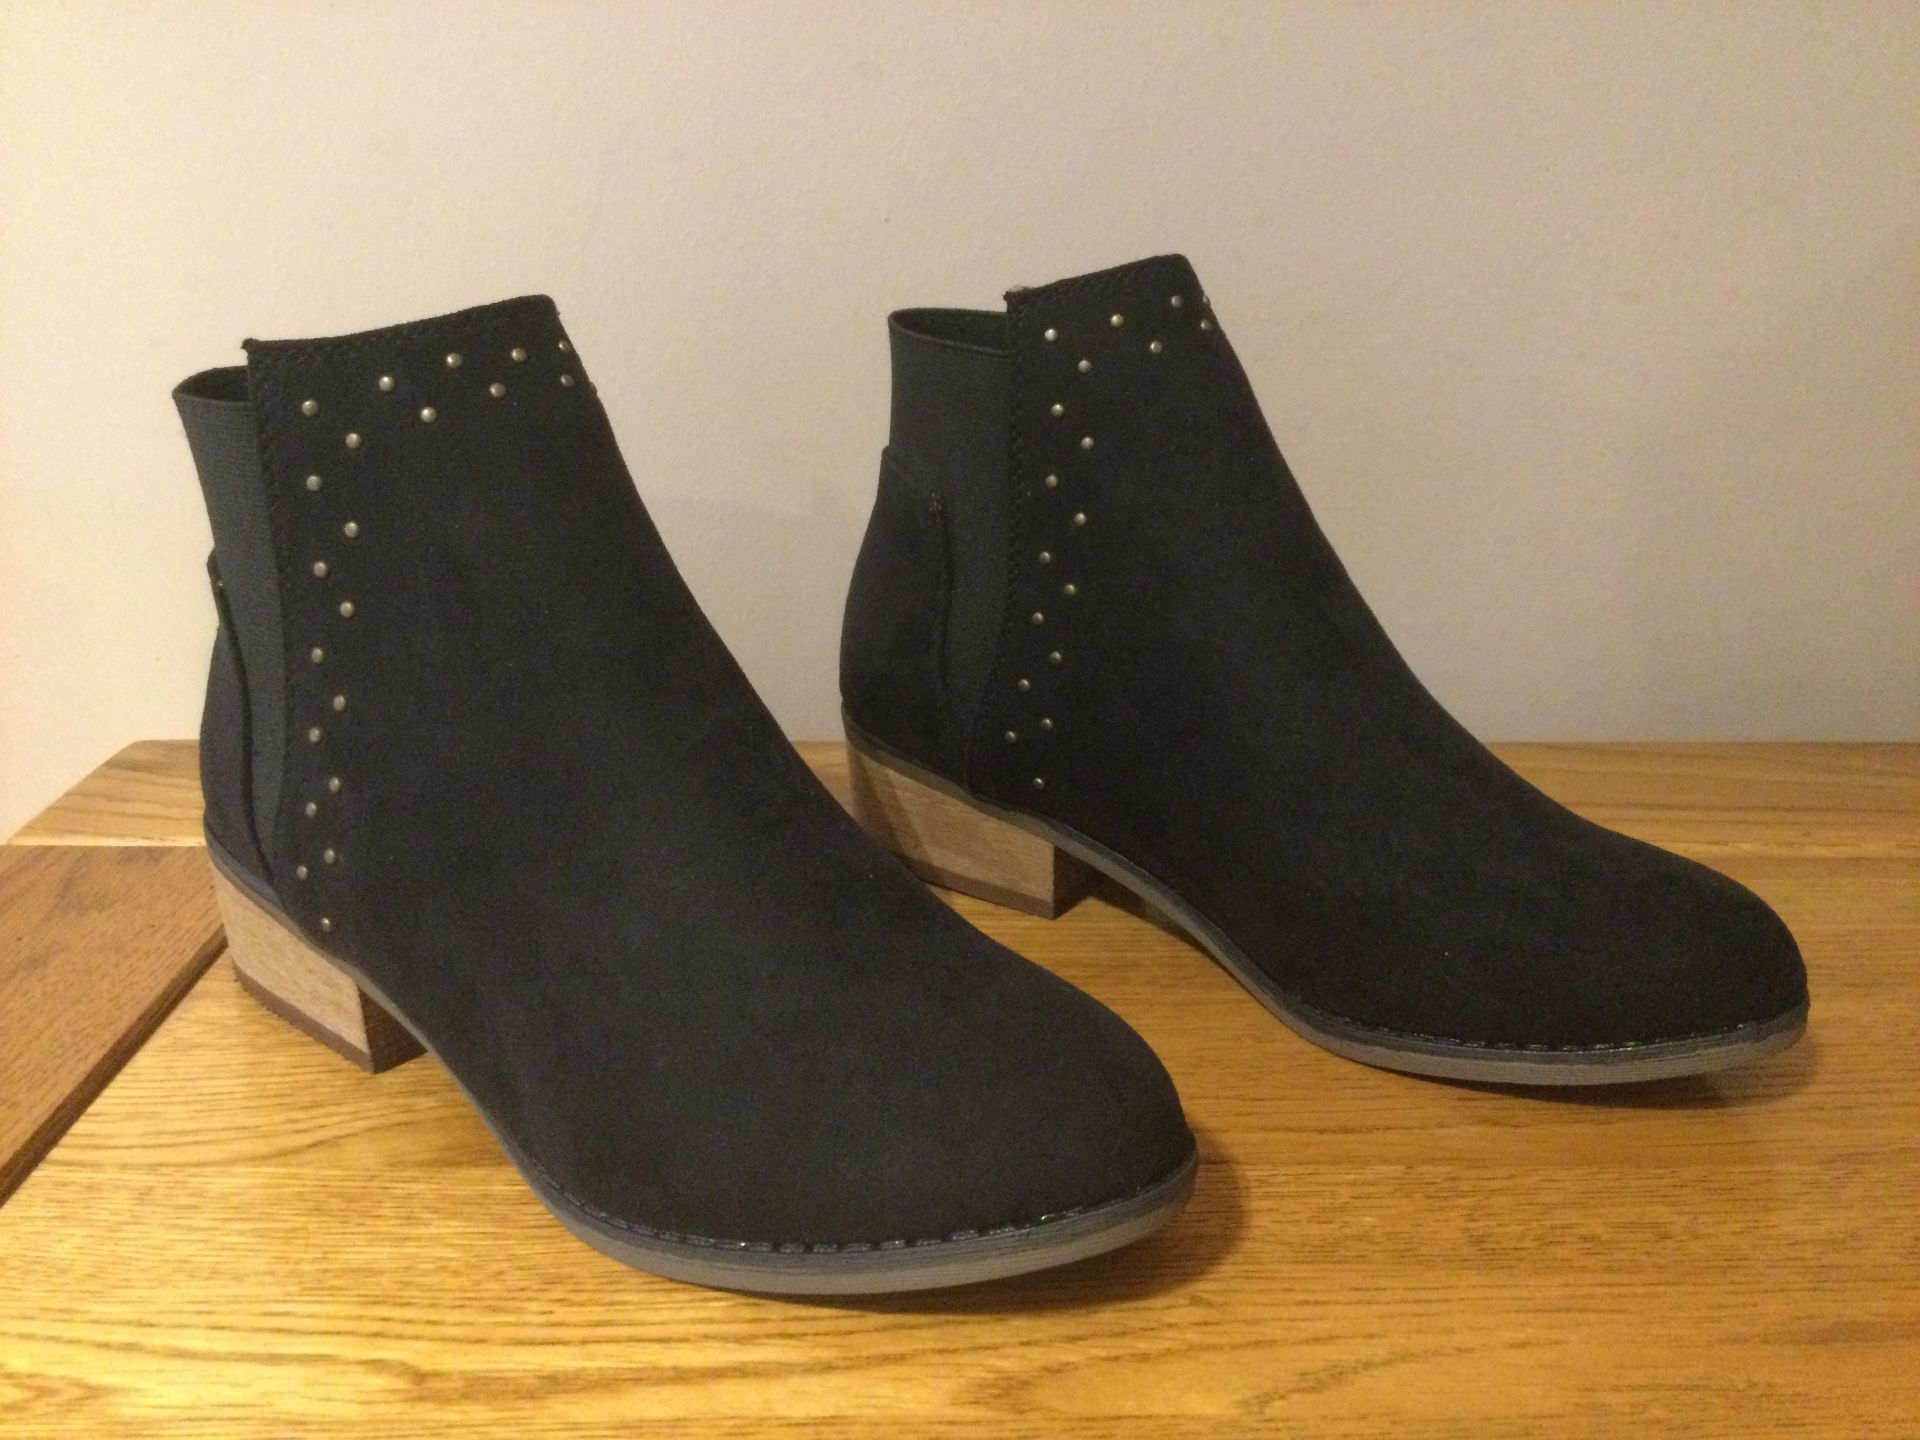 Dolcis “Wendy” Low Heel Ankle Boots, Size 6, Black - New RRP £45.99